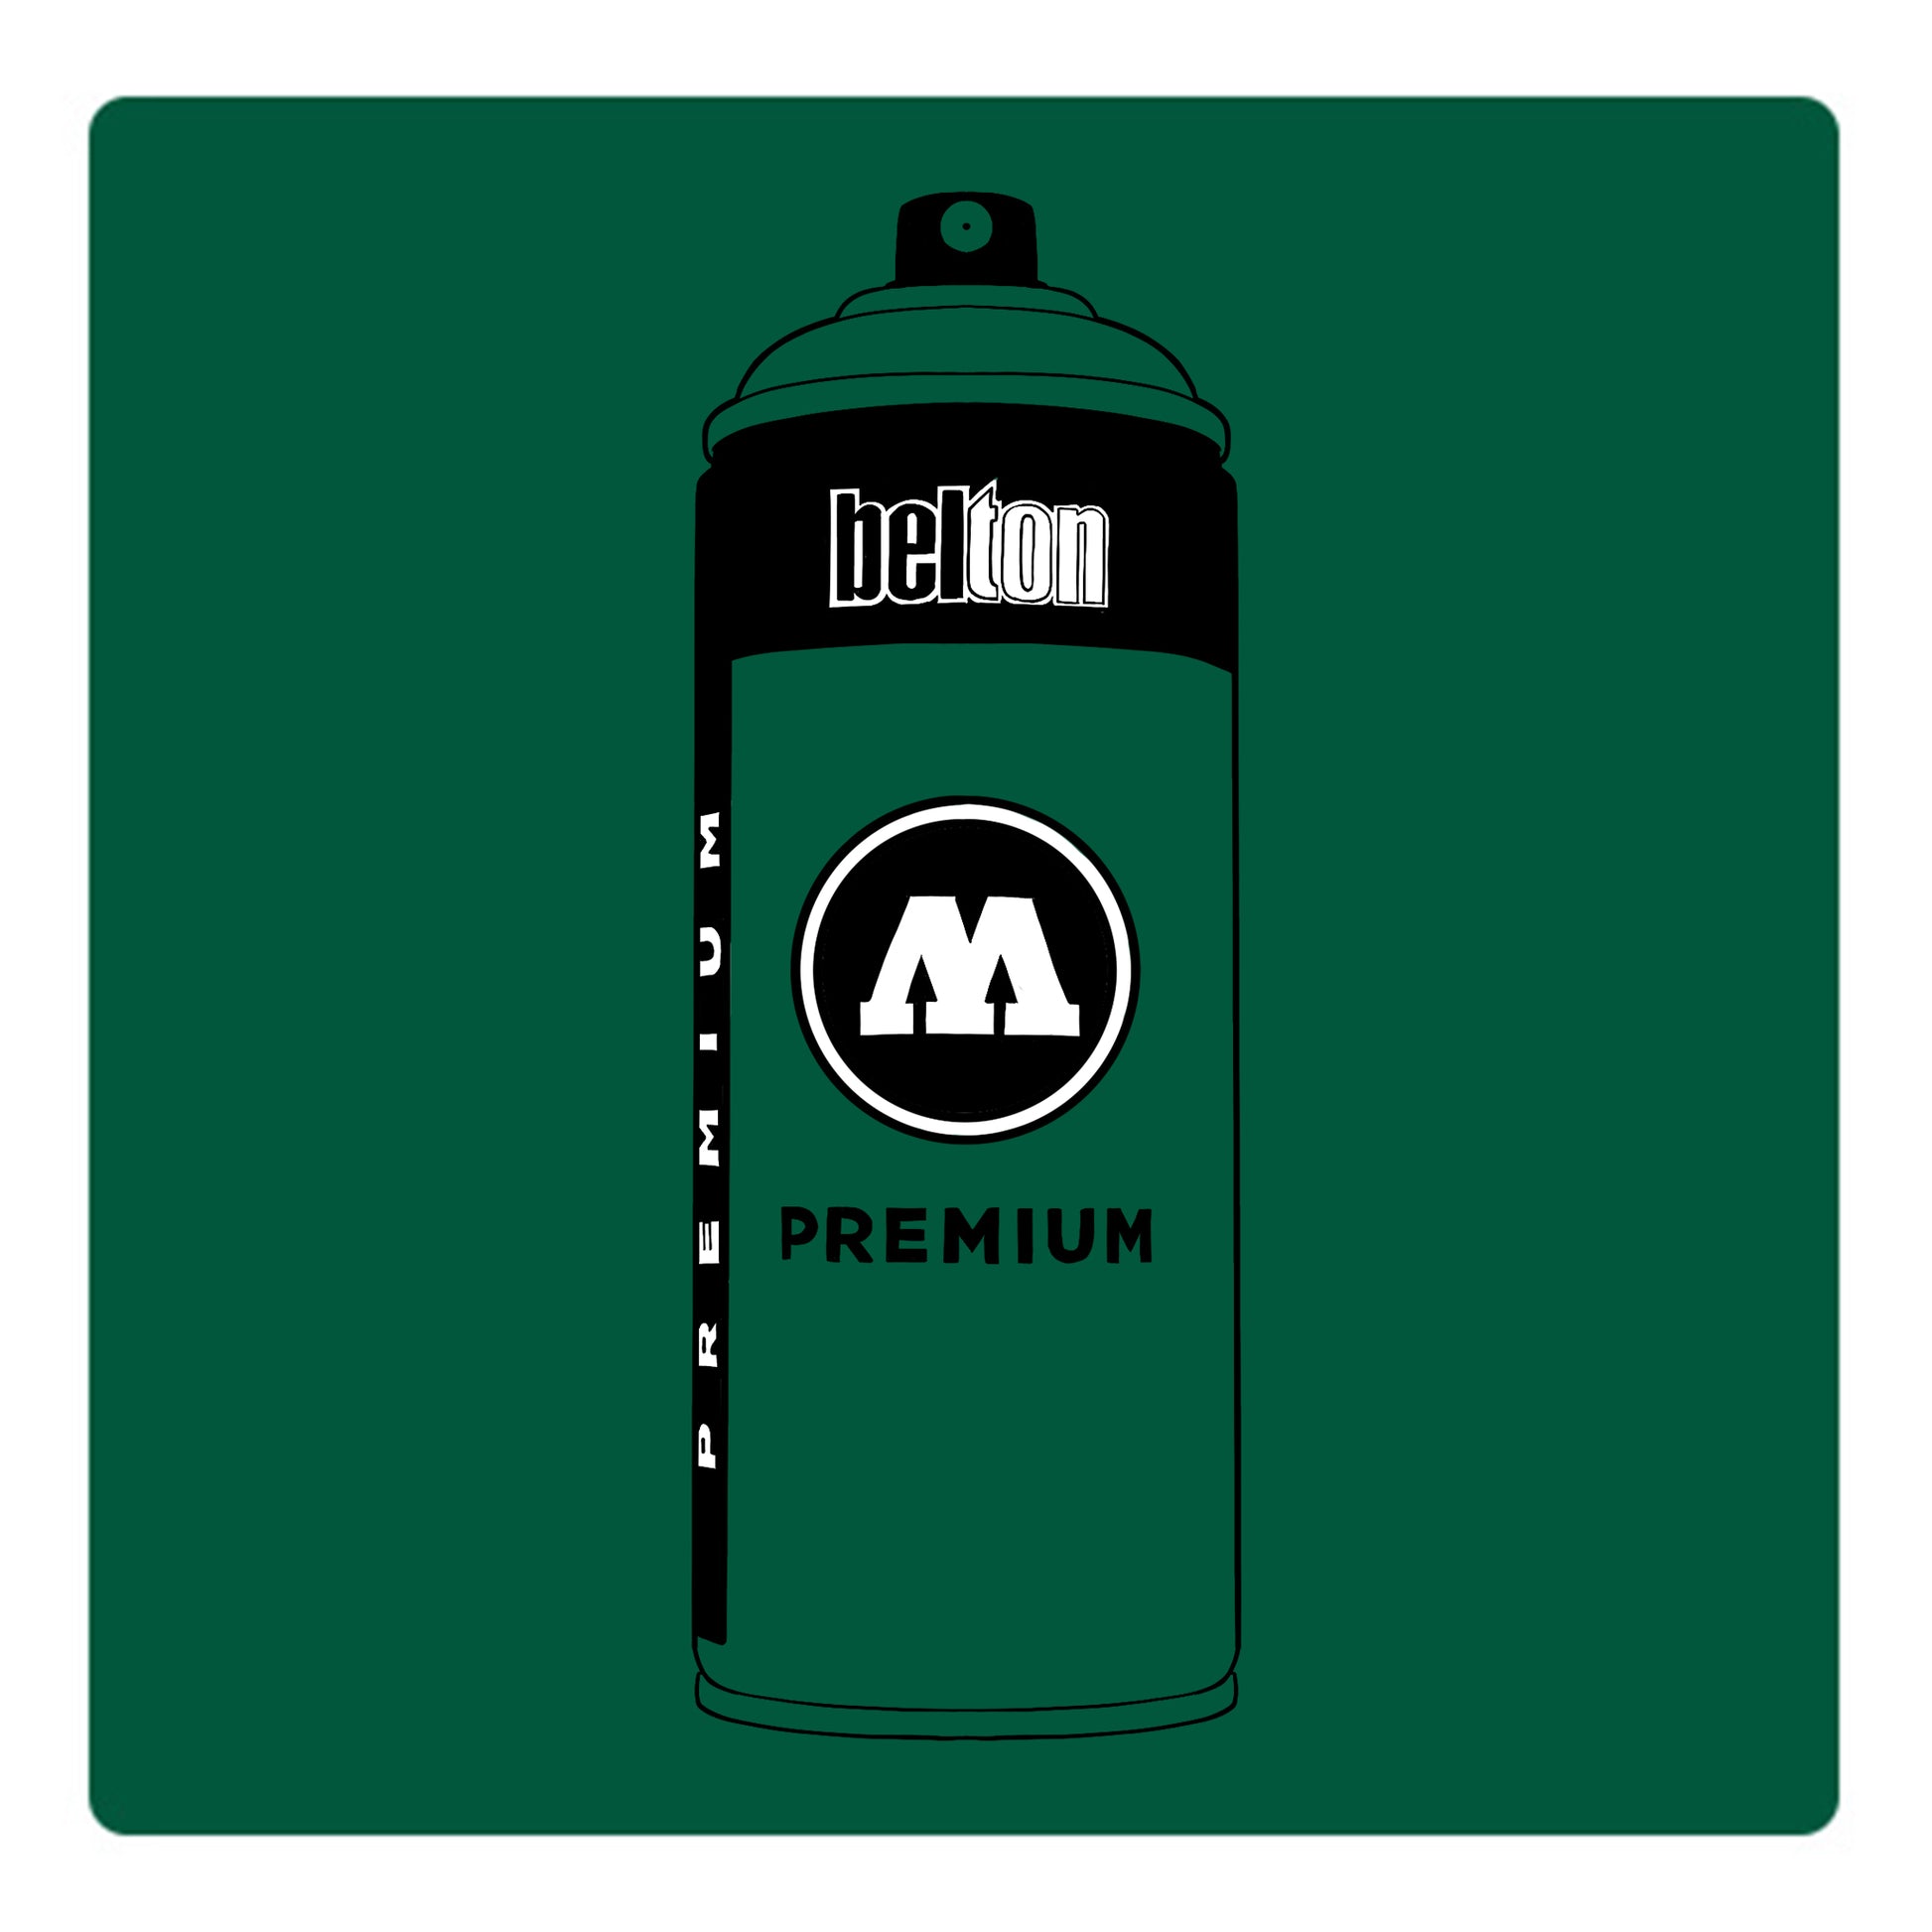 A black outline drawing of a green spray paint can with the words "belton","premium" and the letter"M" written on the face in black and white font. The background is a color swatch of the same green with a white border